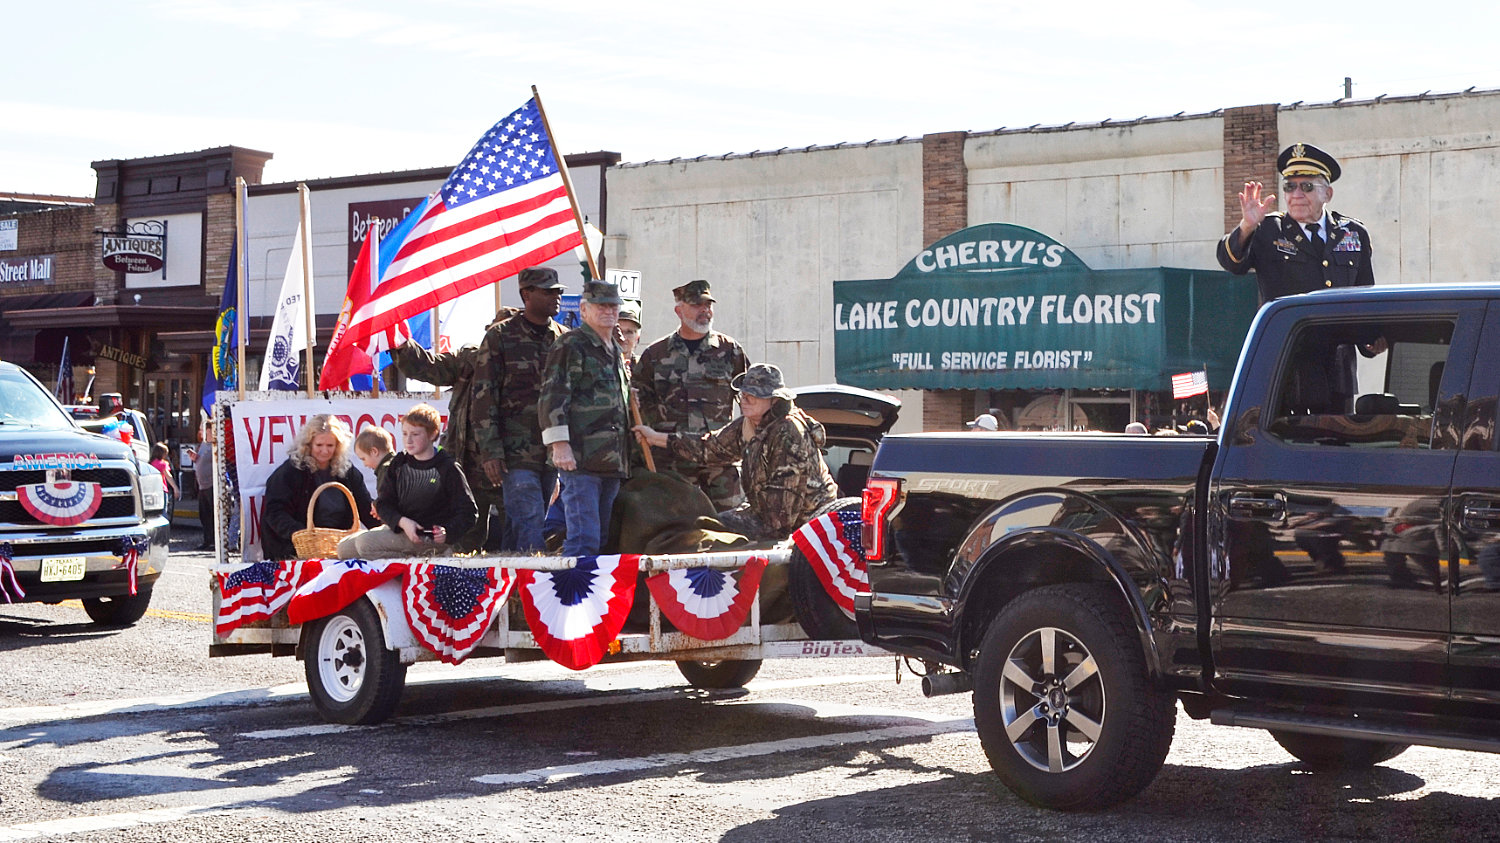 VFW Post 7523, led by Commander Denver Tate, won first place in float entries at the Mineola Veterans Day Parade.